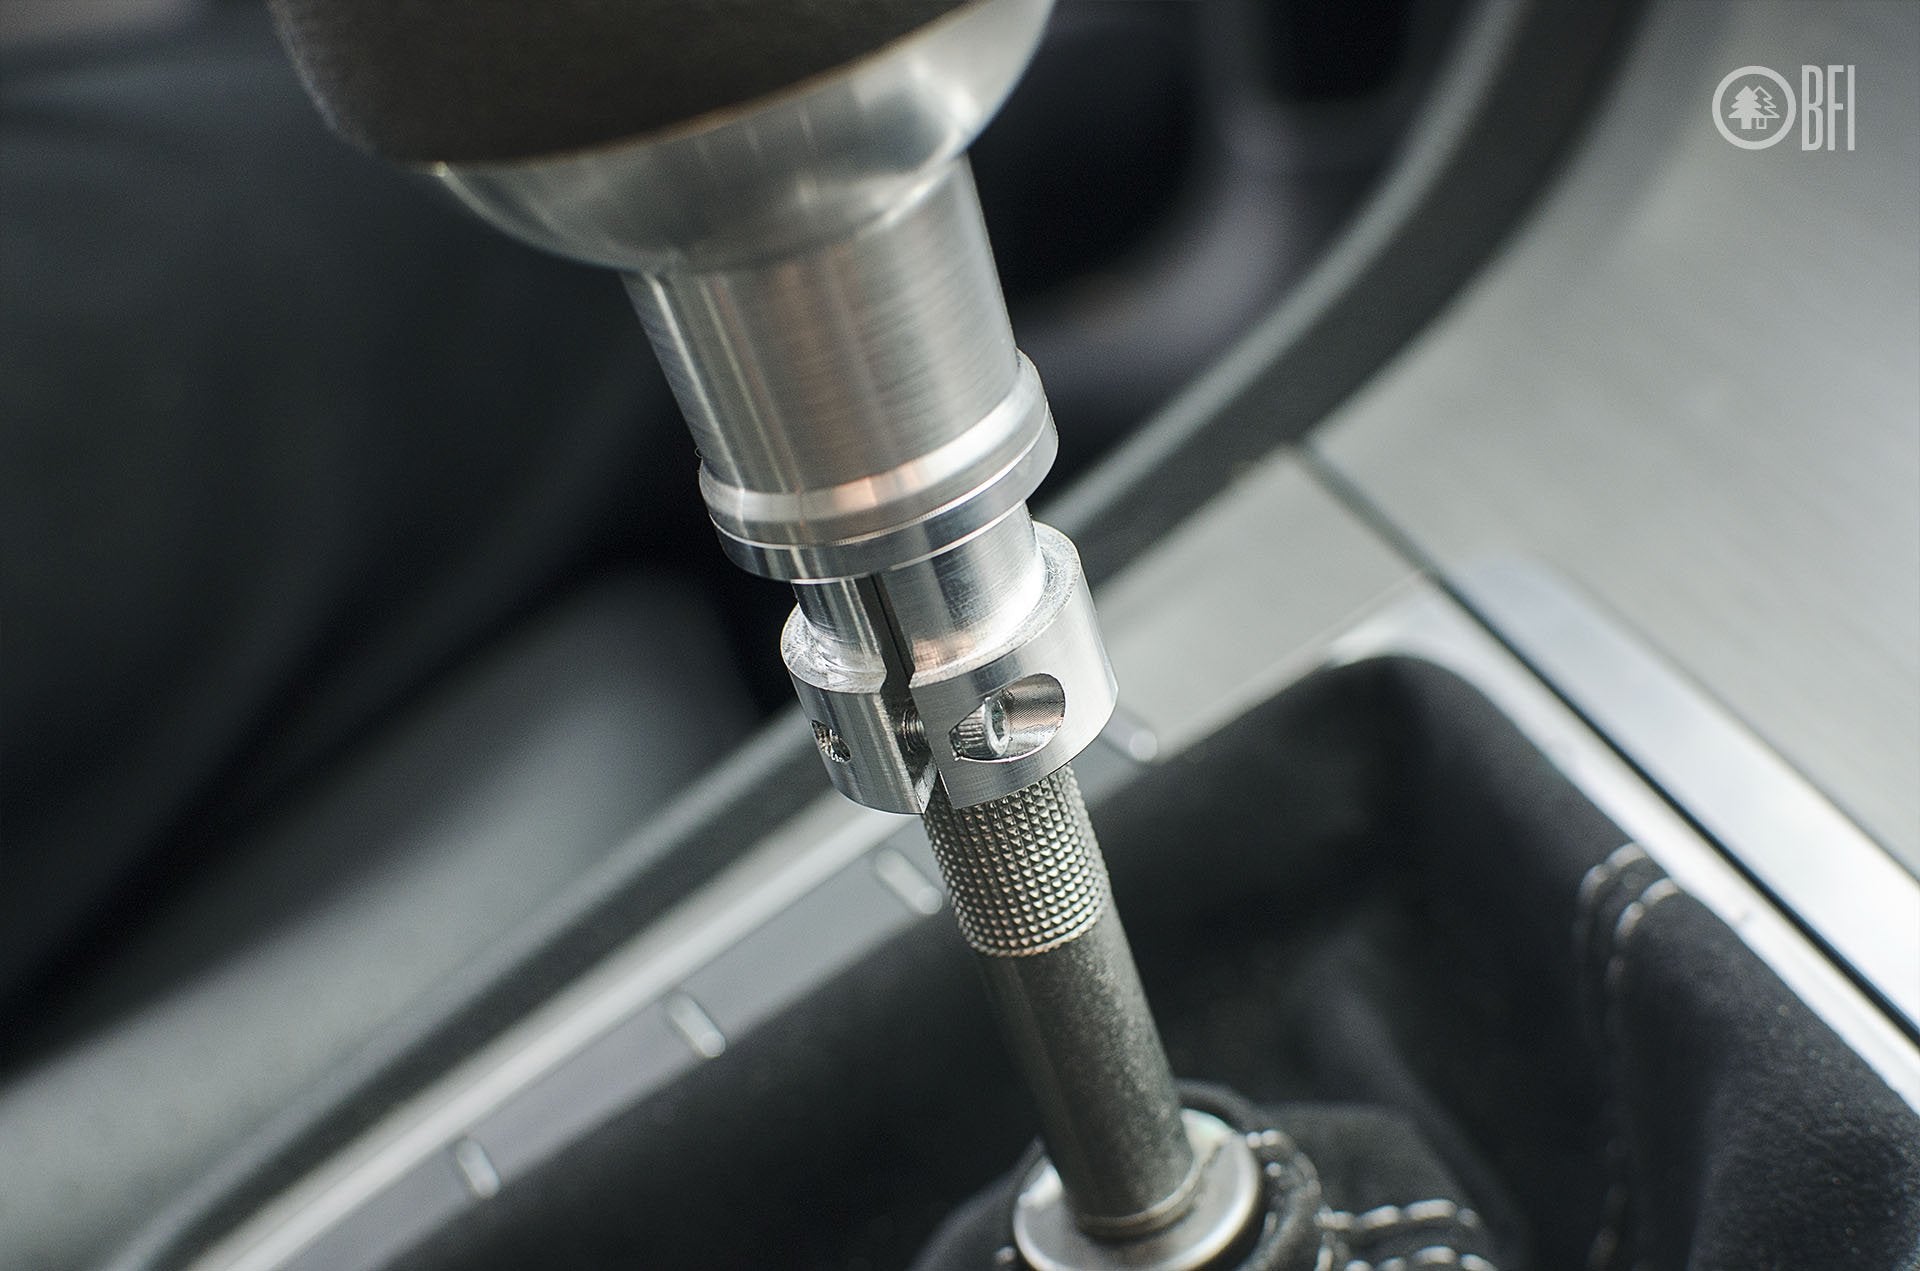 BFI GS Manual Shift Knob Adapter | Volkswagen/Audi Revised Clamp Style